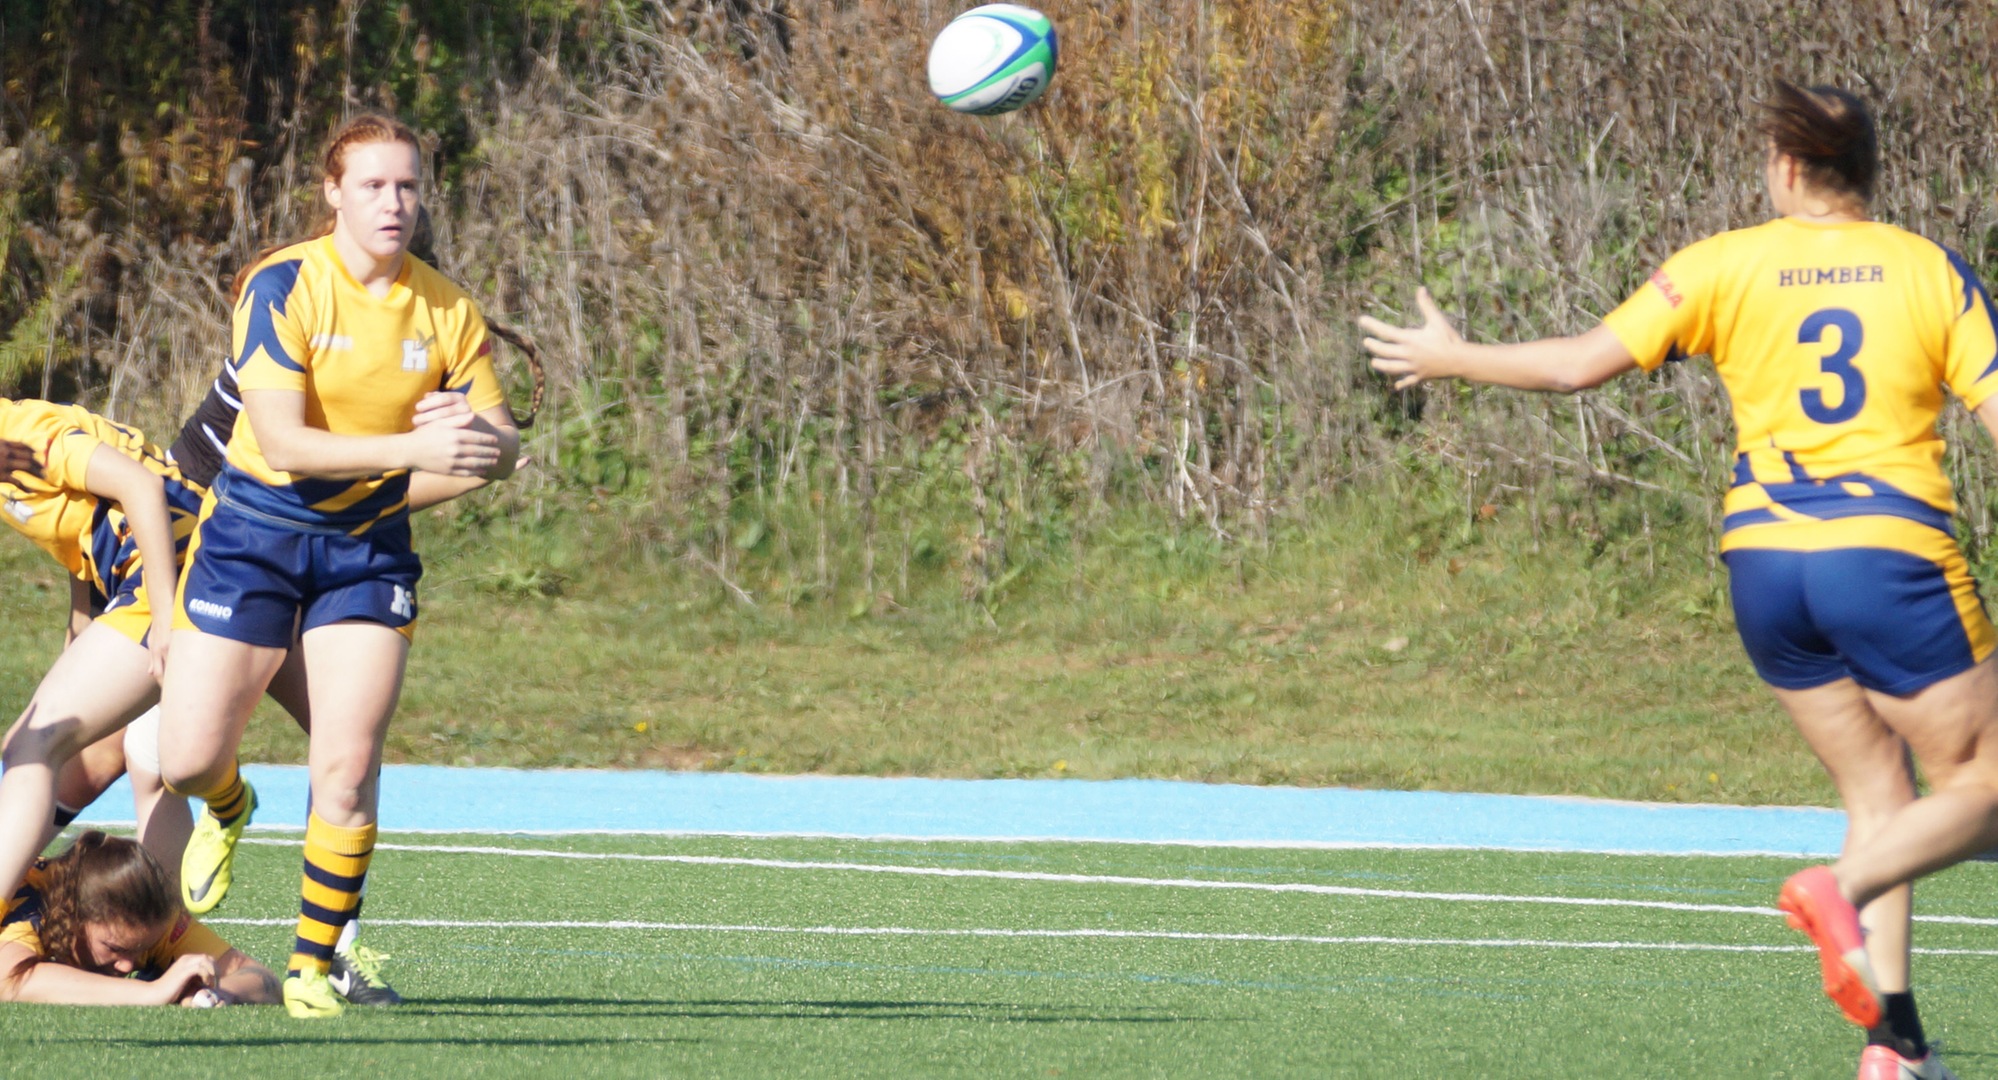 WOMEN’S RUGBY 7’S END SEASON WITH CLEAN SLATE AT 16-0